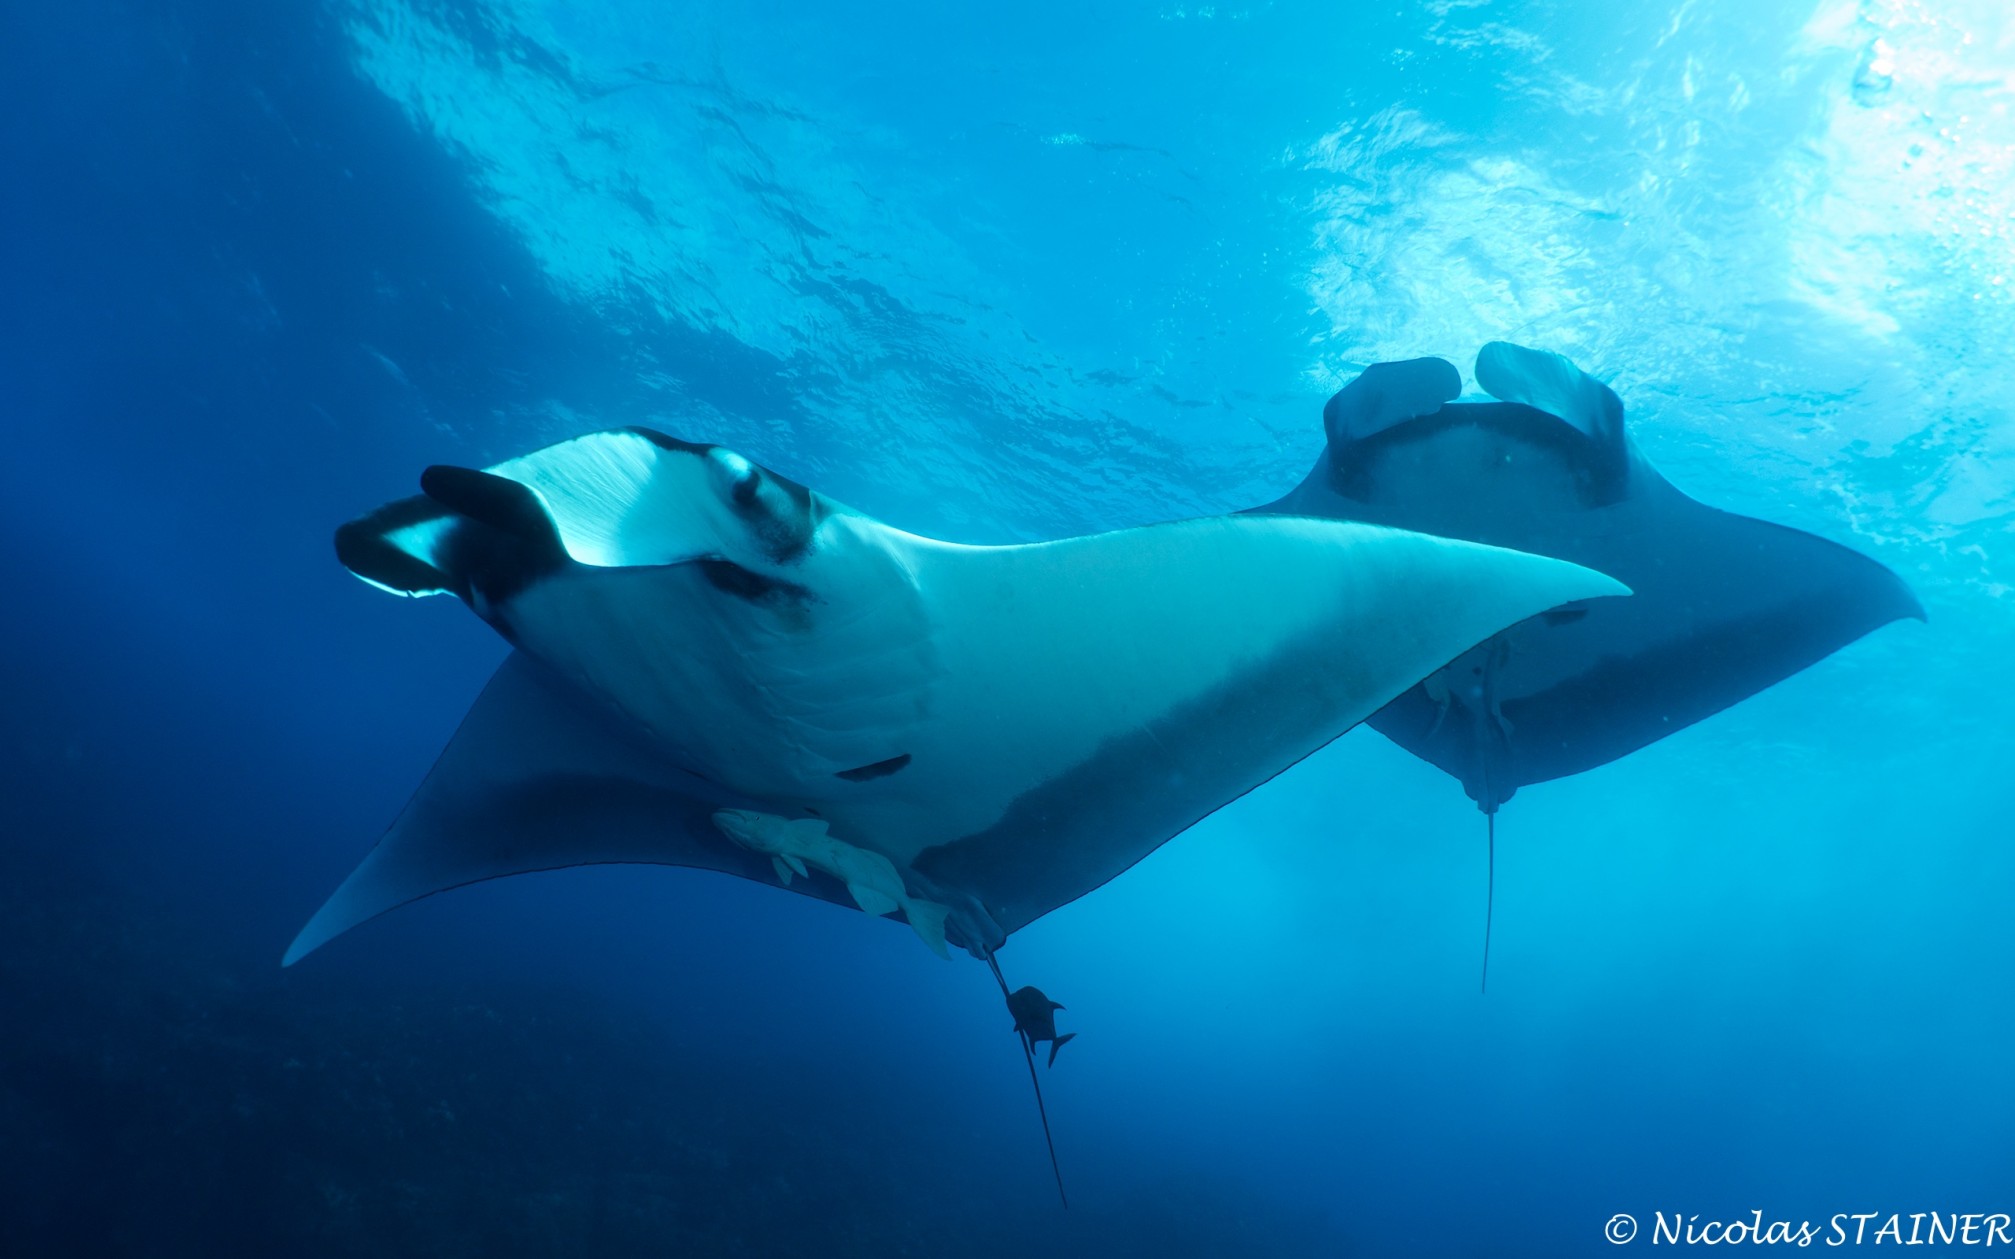 Giant Manta Rays Came to Greet us at Every Dive